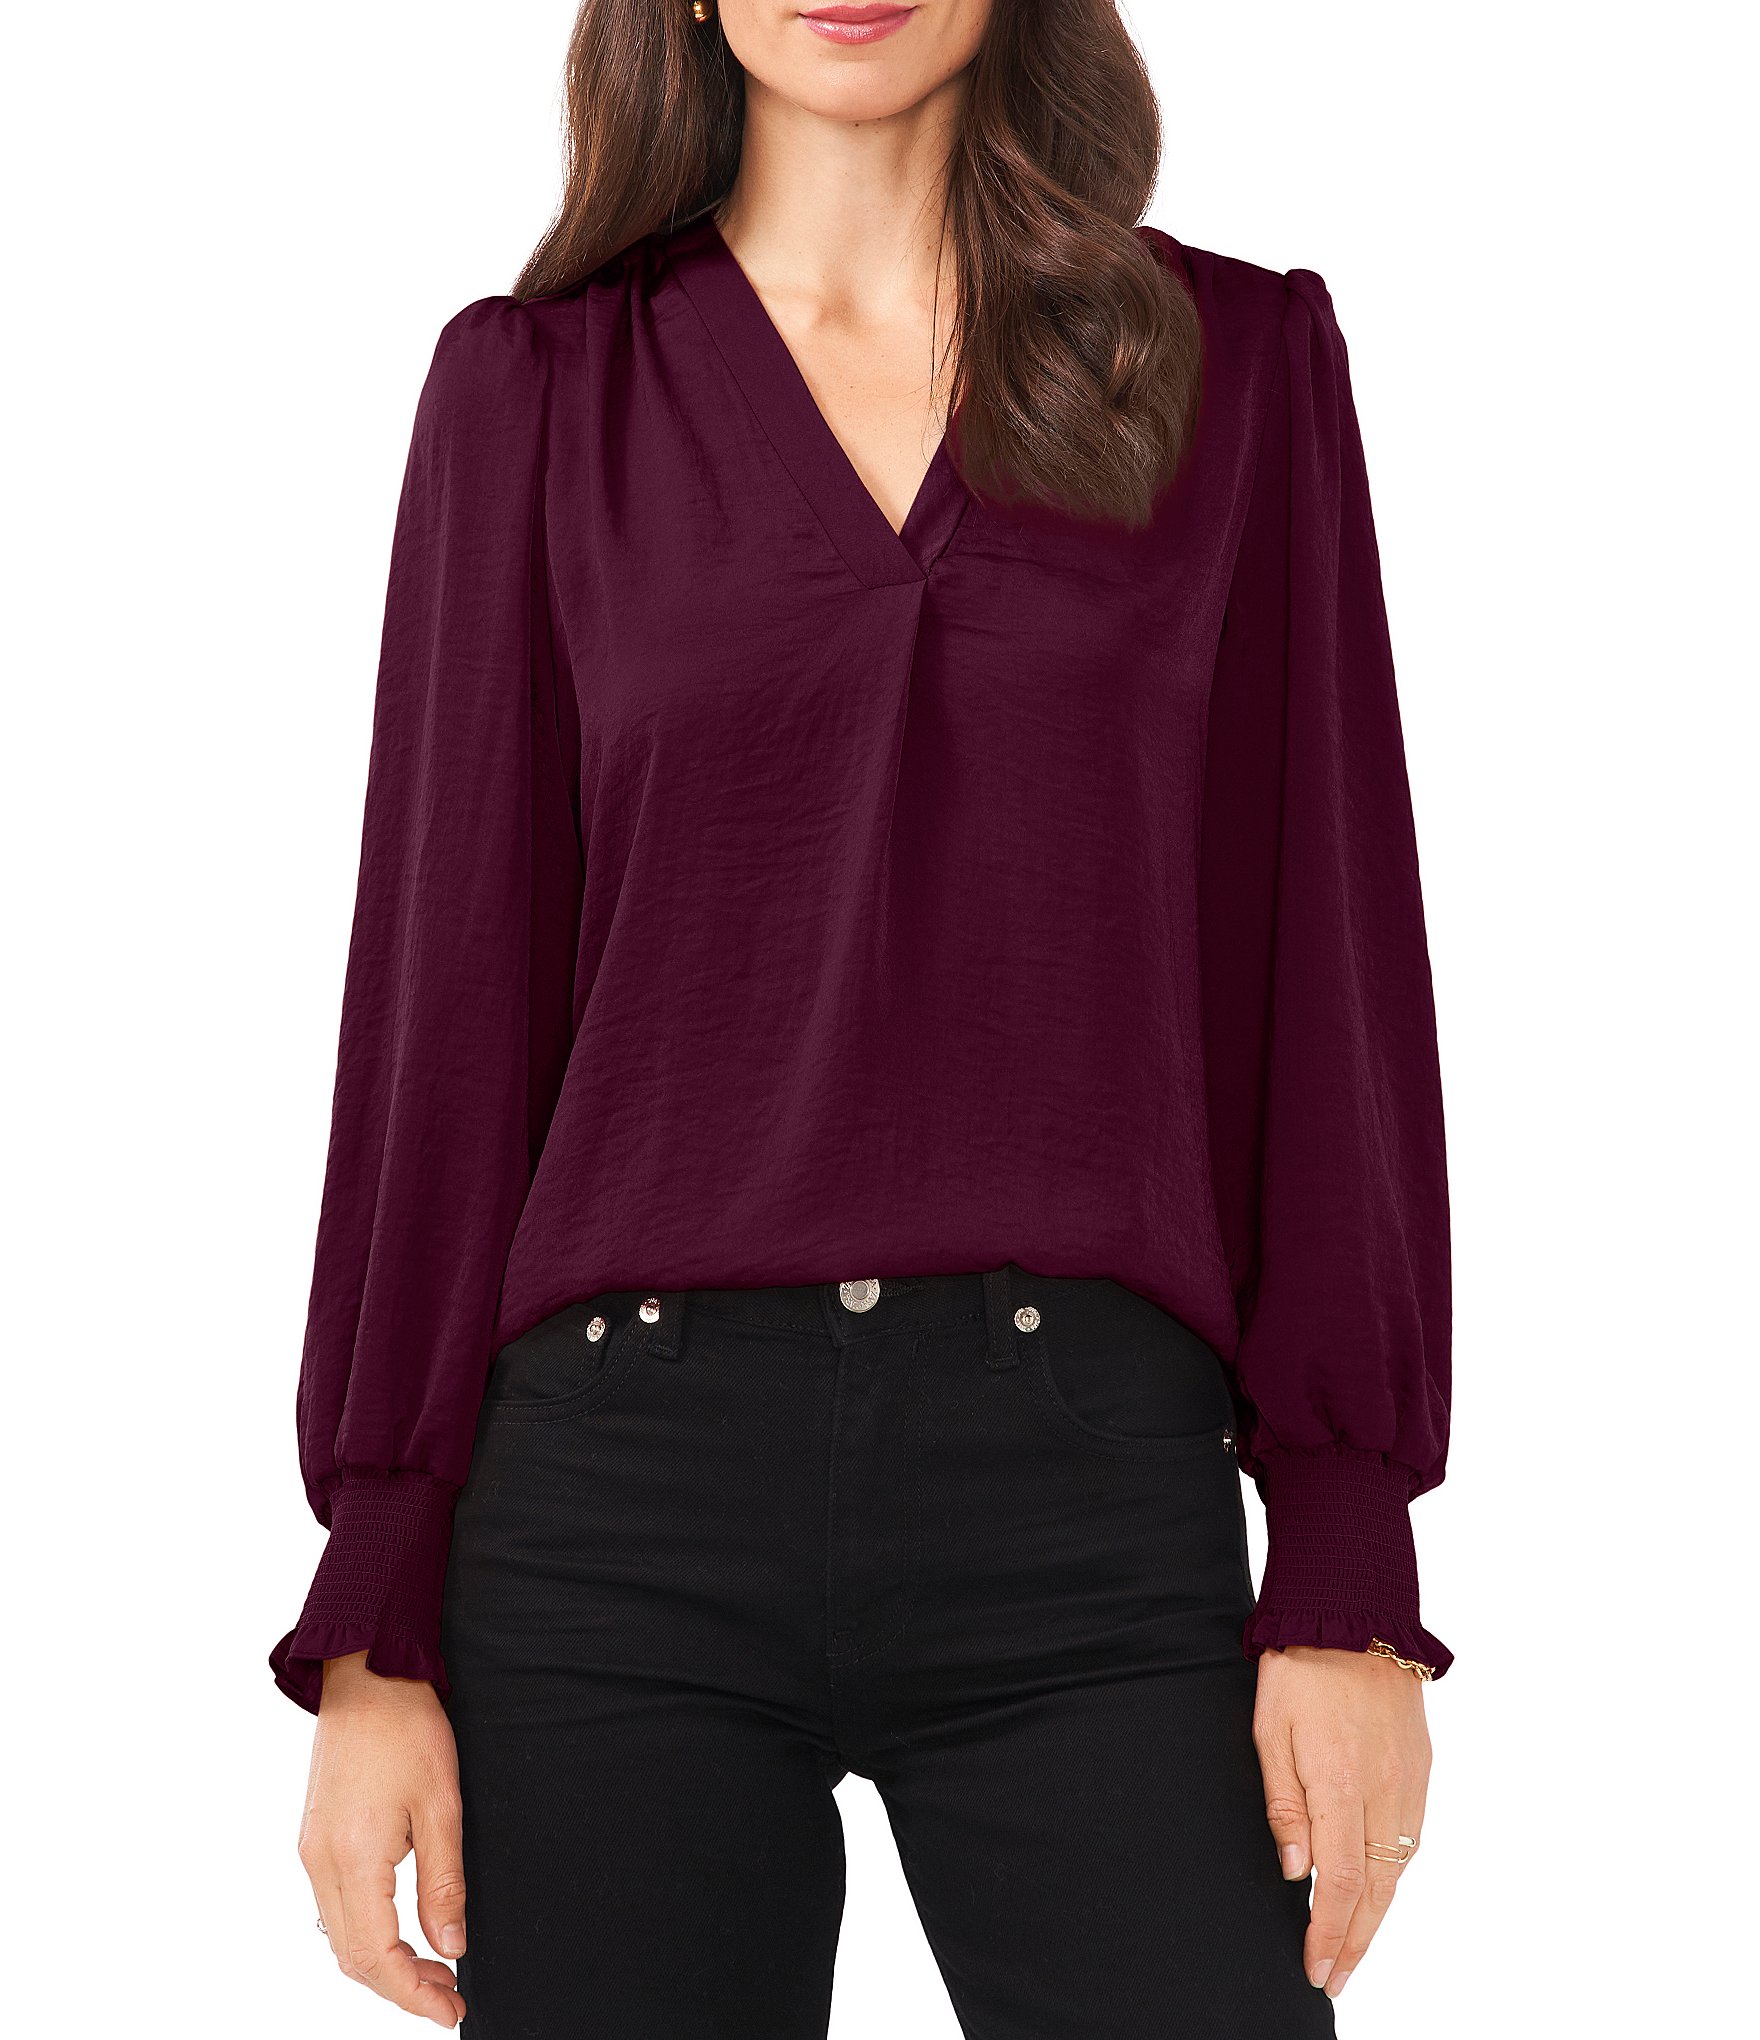 Vince Camuto Womens Embellished V-Neck Tie Front Pullover Top Shirt BHFO  3763